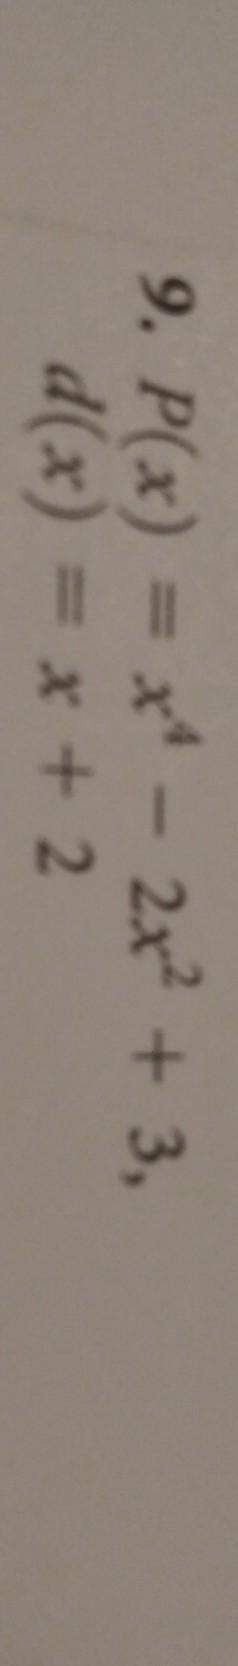 In each of the following, a polynomial p(x) and a divisor d(x) are given. use long division to find